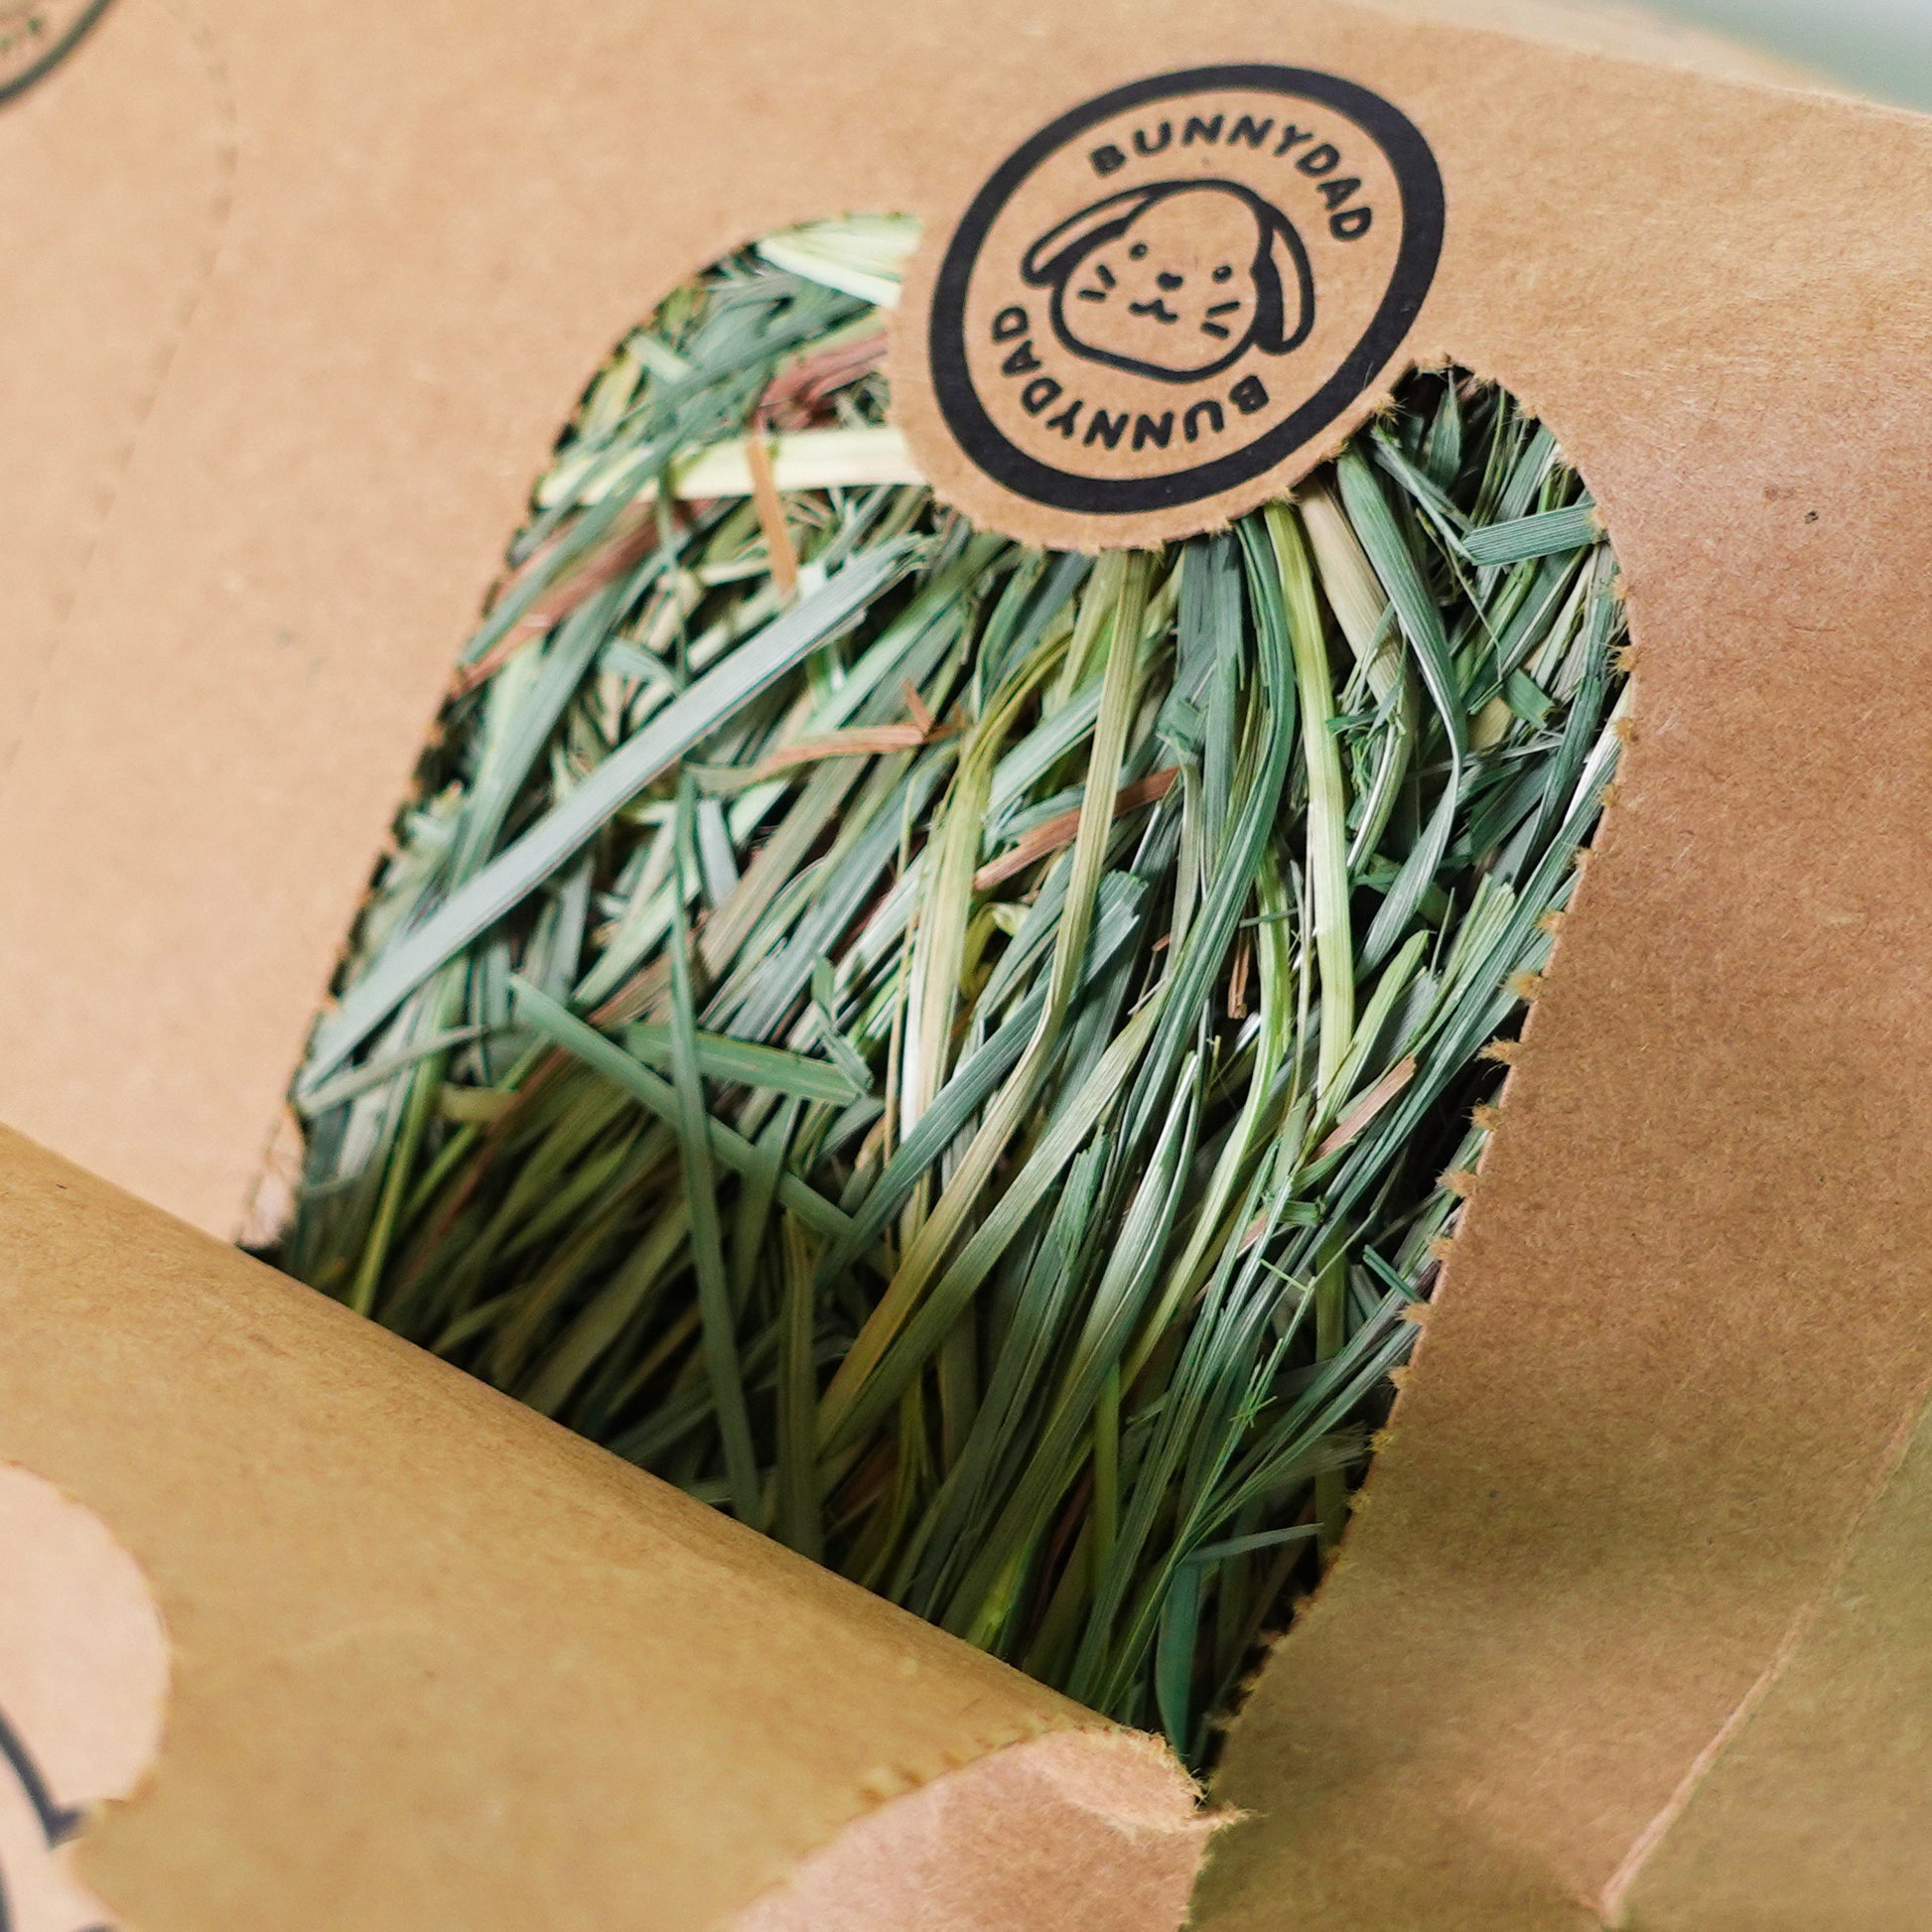 Close-up shot of an opened Hay Pod on a white background, highlighting the detailed view of the partially opened section. The image depicts the intricate closure mechanism of the Hay Pod, showcasing the process of securing it. Inside the opened Hay Pod, vibrant green fresh hay is visible, with the BunnyDad logo prominently displayed on top.